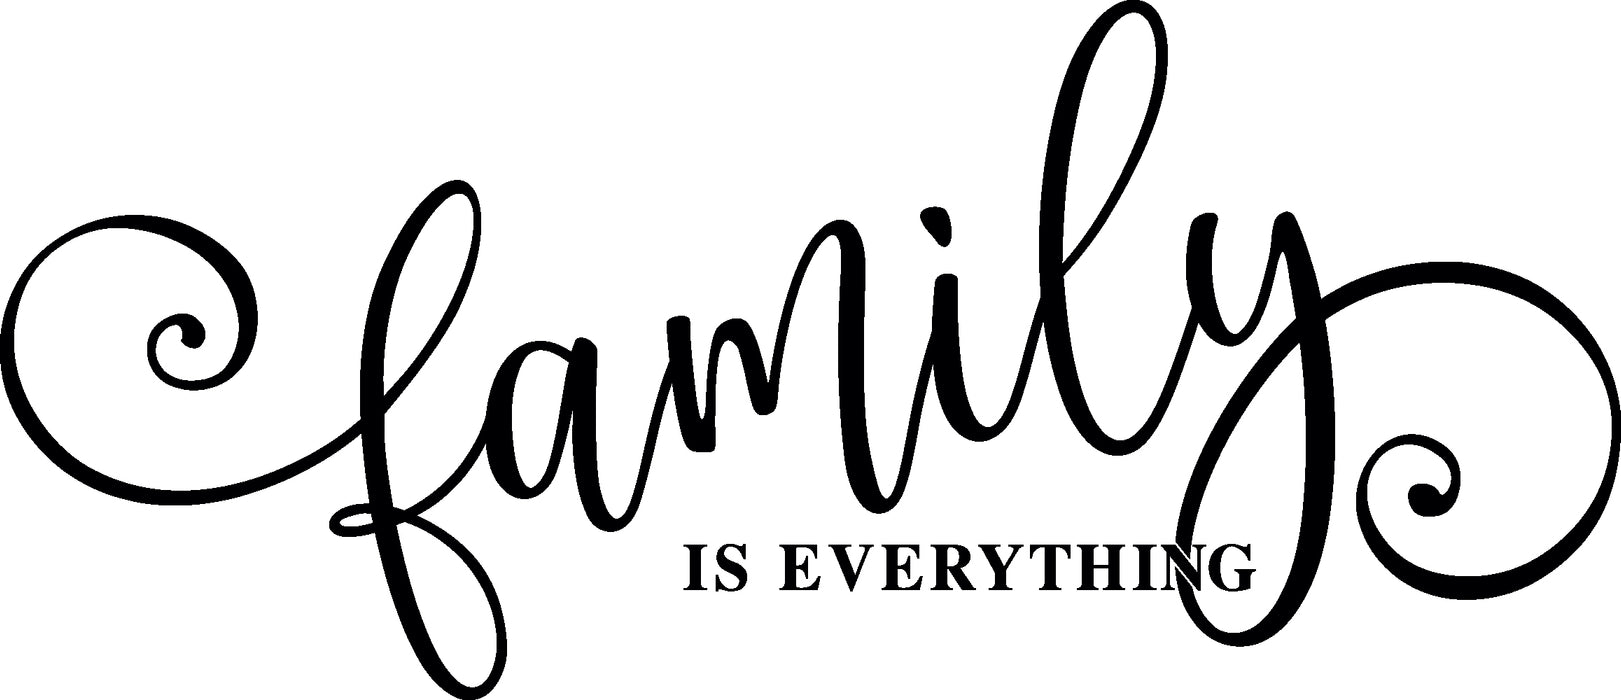 Wall Decal Family Is Everything Home Living Room Vinyl Decor Black 22.5 in x 10 in gz494